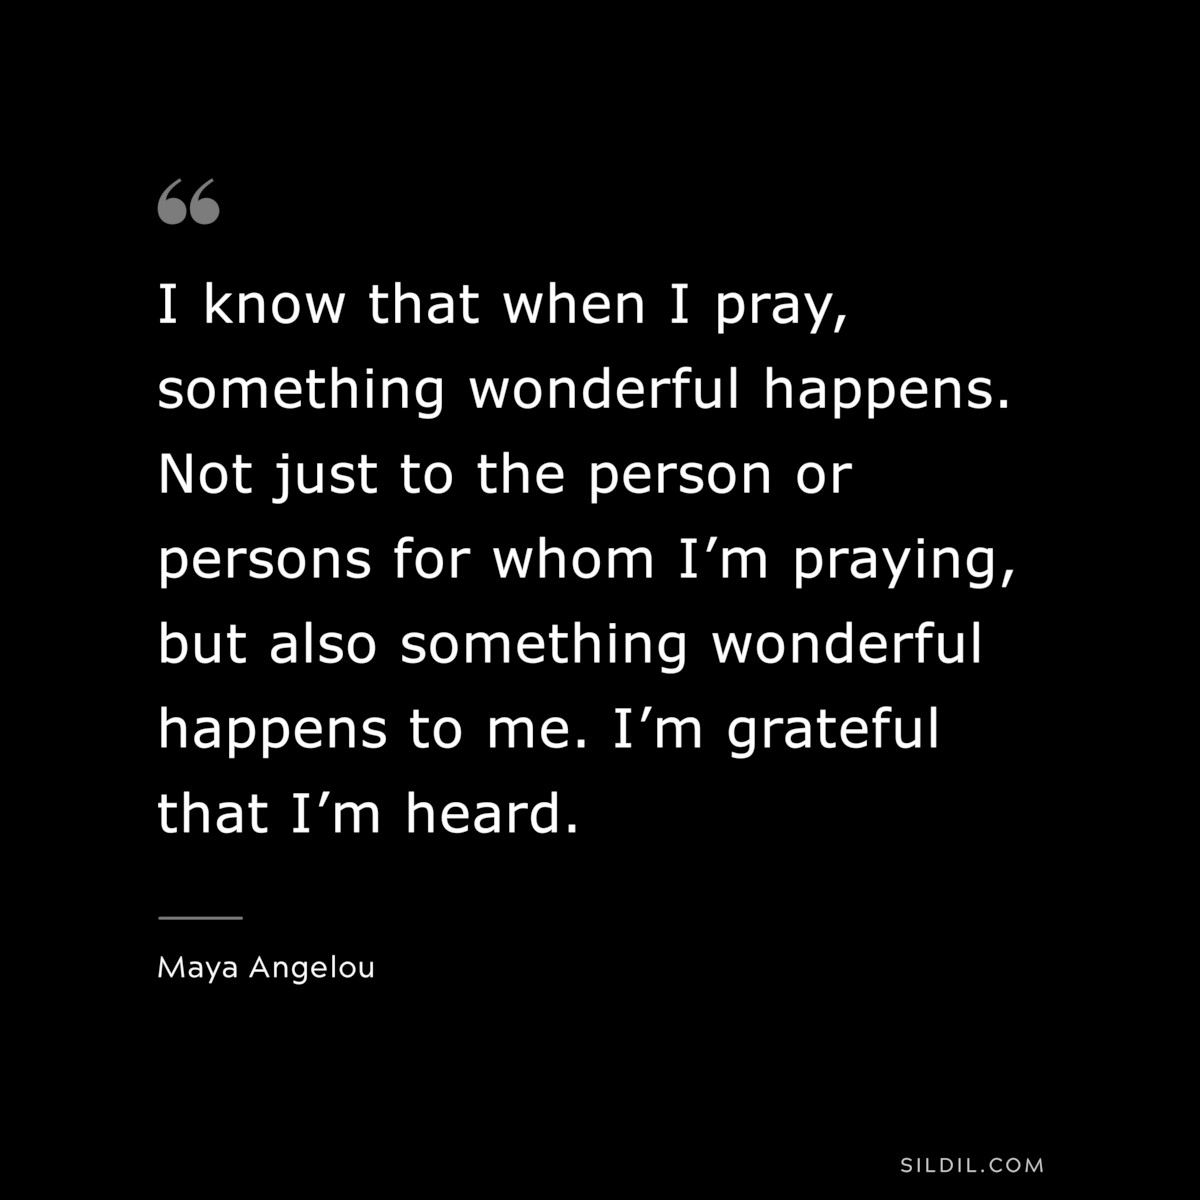 I know that when I pray, something wonderful happens. Not just to the person or persons for whom I’m praying, but also something wonderful happens to me. I’m grateful that I’m heard. ― Maya Angelou